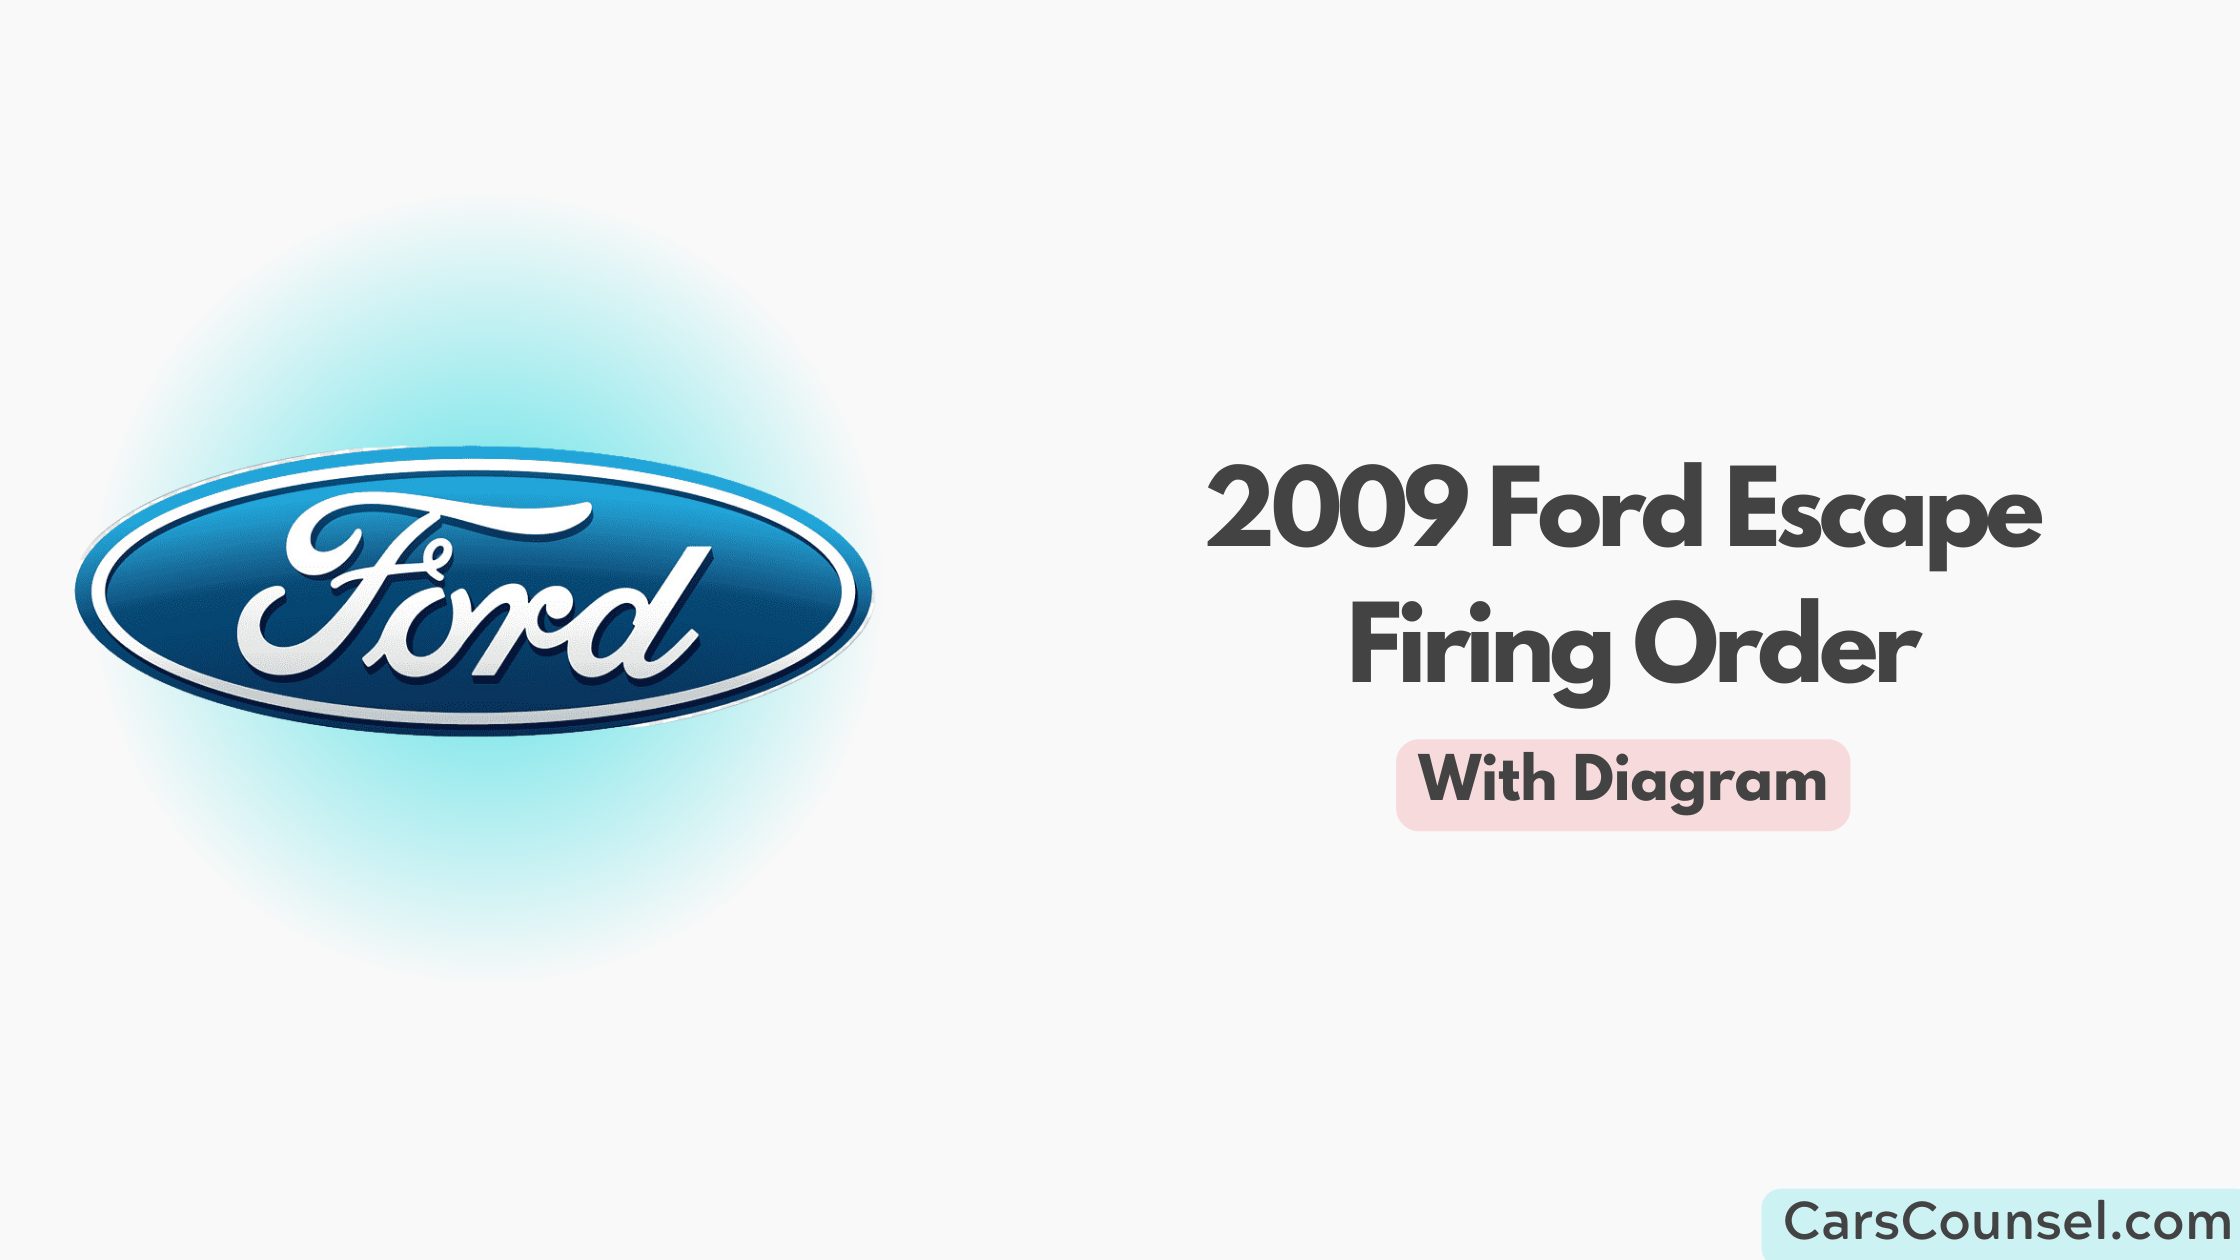 2009 Ford Escape Firing Order With Diagram